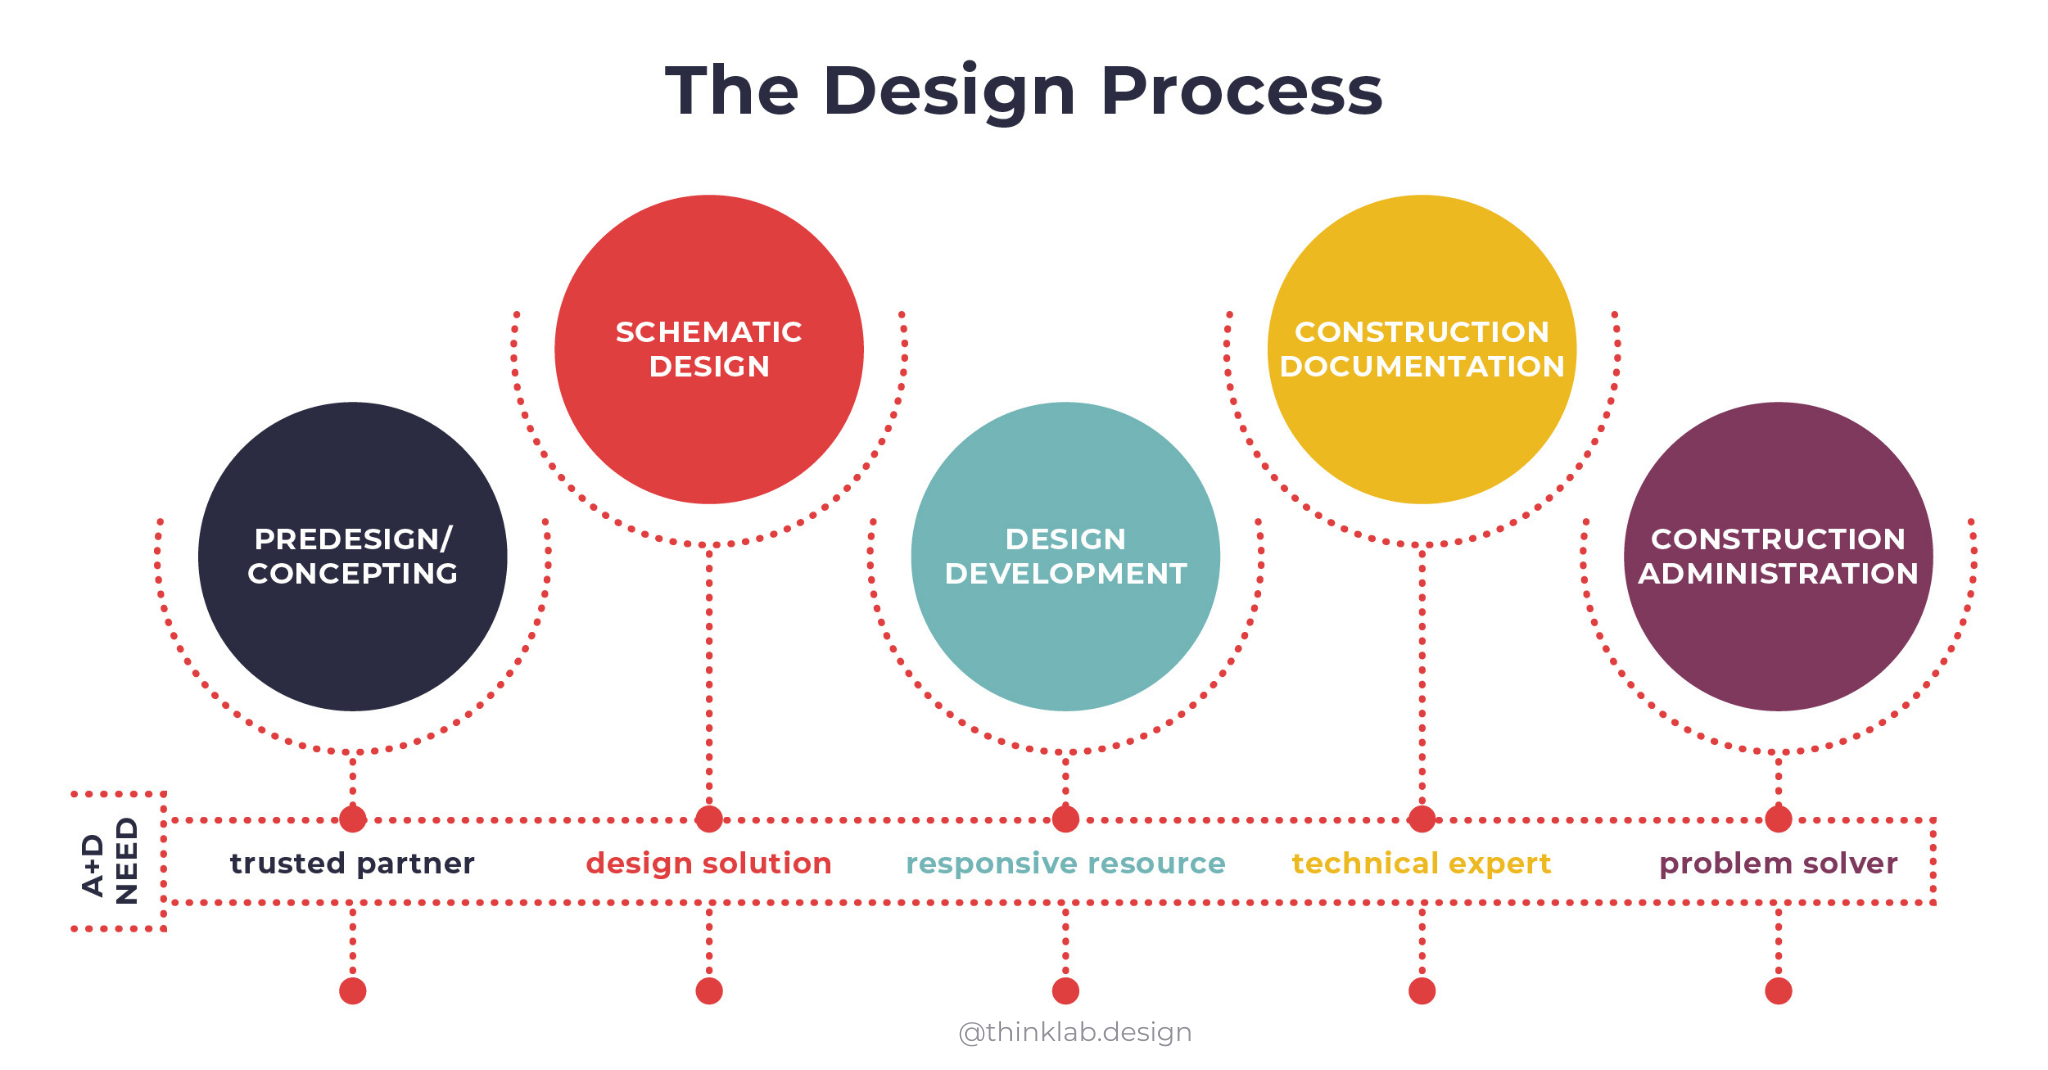 Graphic showing the stages of the design process according to ThinkLab research that aligns architect and designer needs with their connection to a trusted industry partner